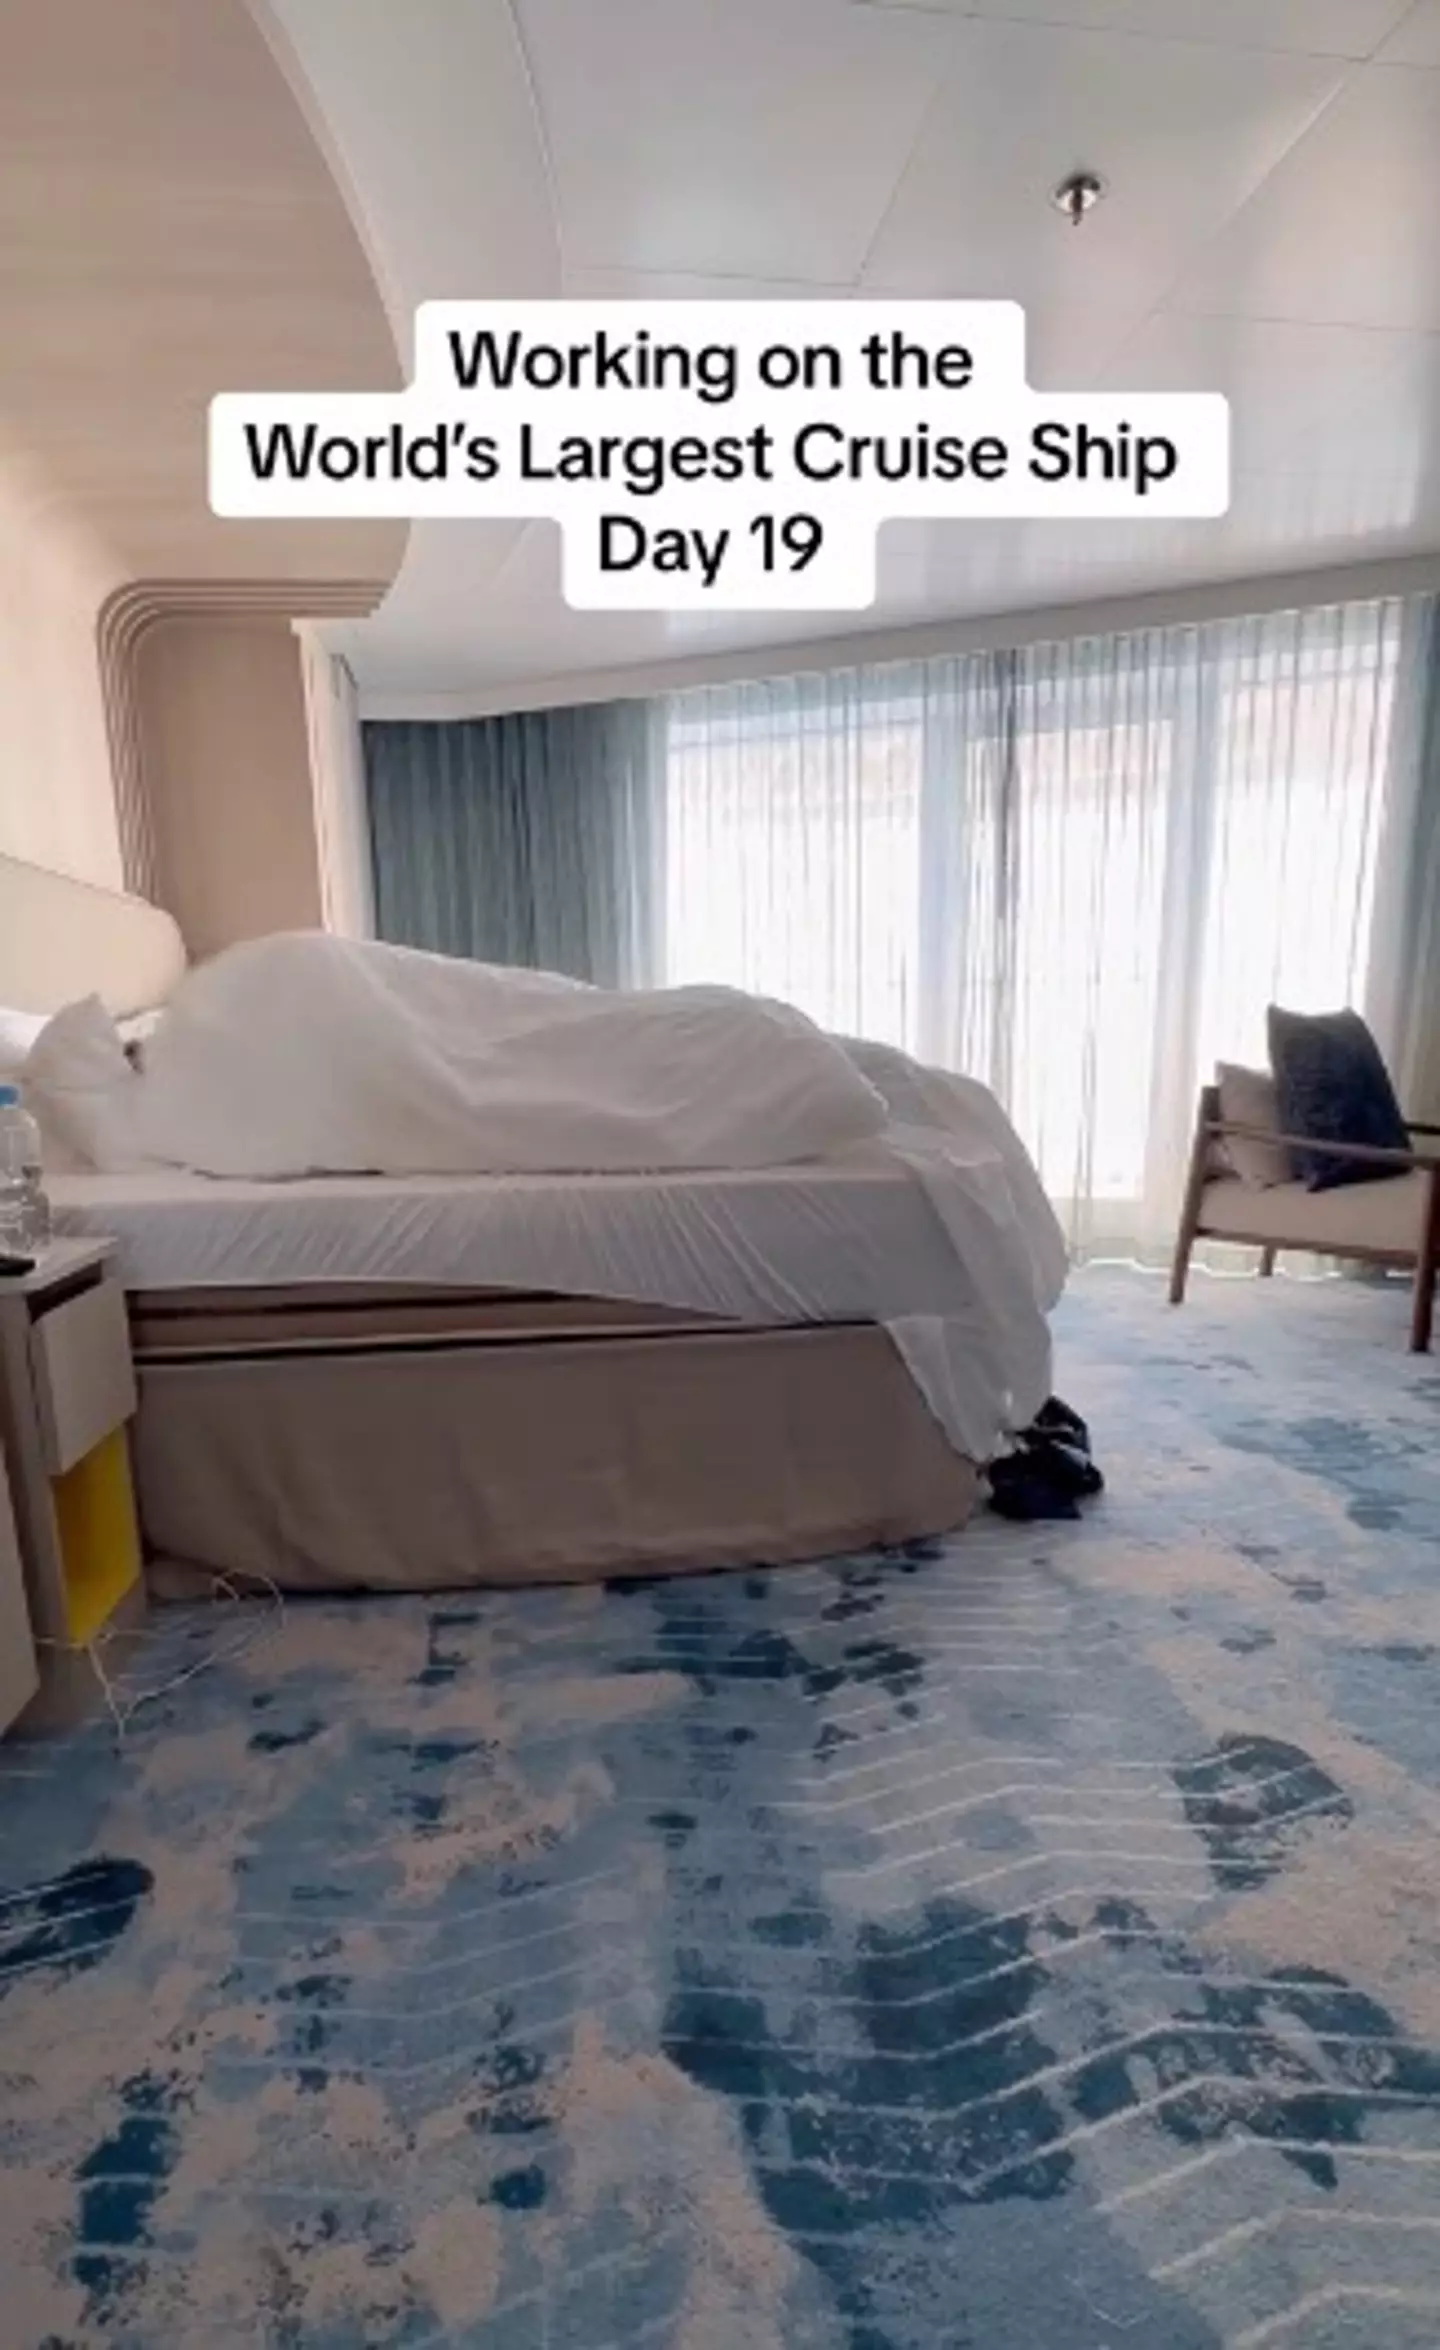 An employee on the world's largest cruise ship might just have the best job in the world after baffling viewers with 'stress testing' everything prior to guests' arrival.